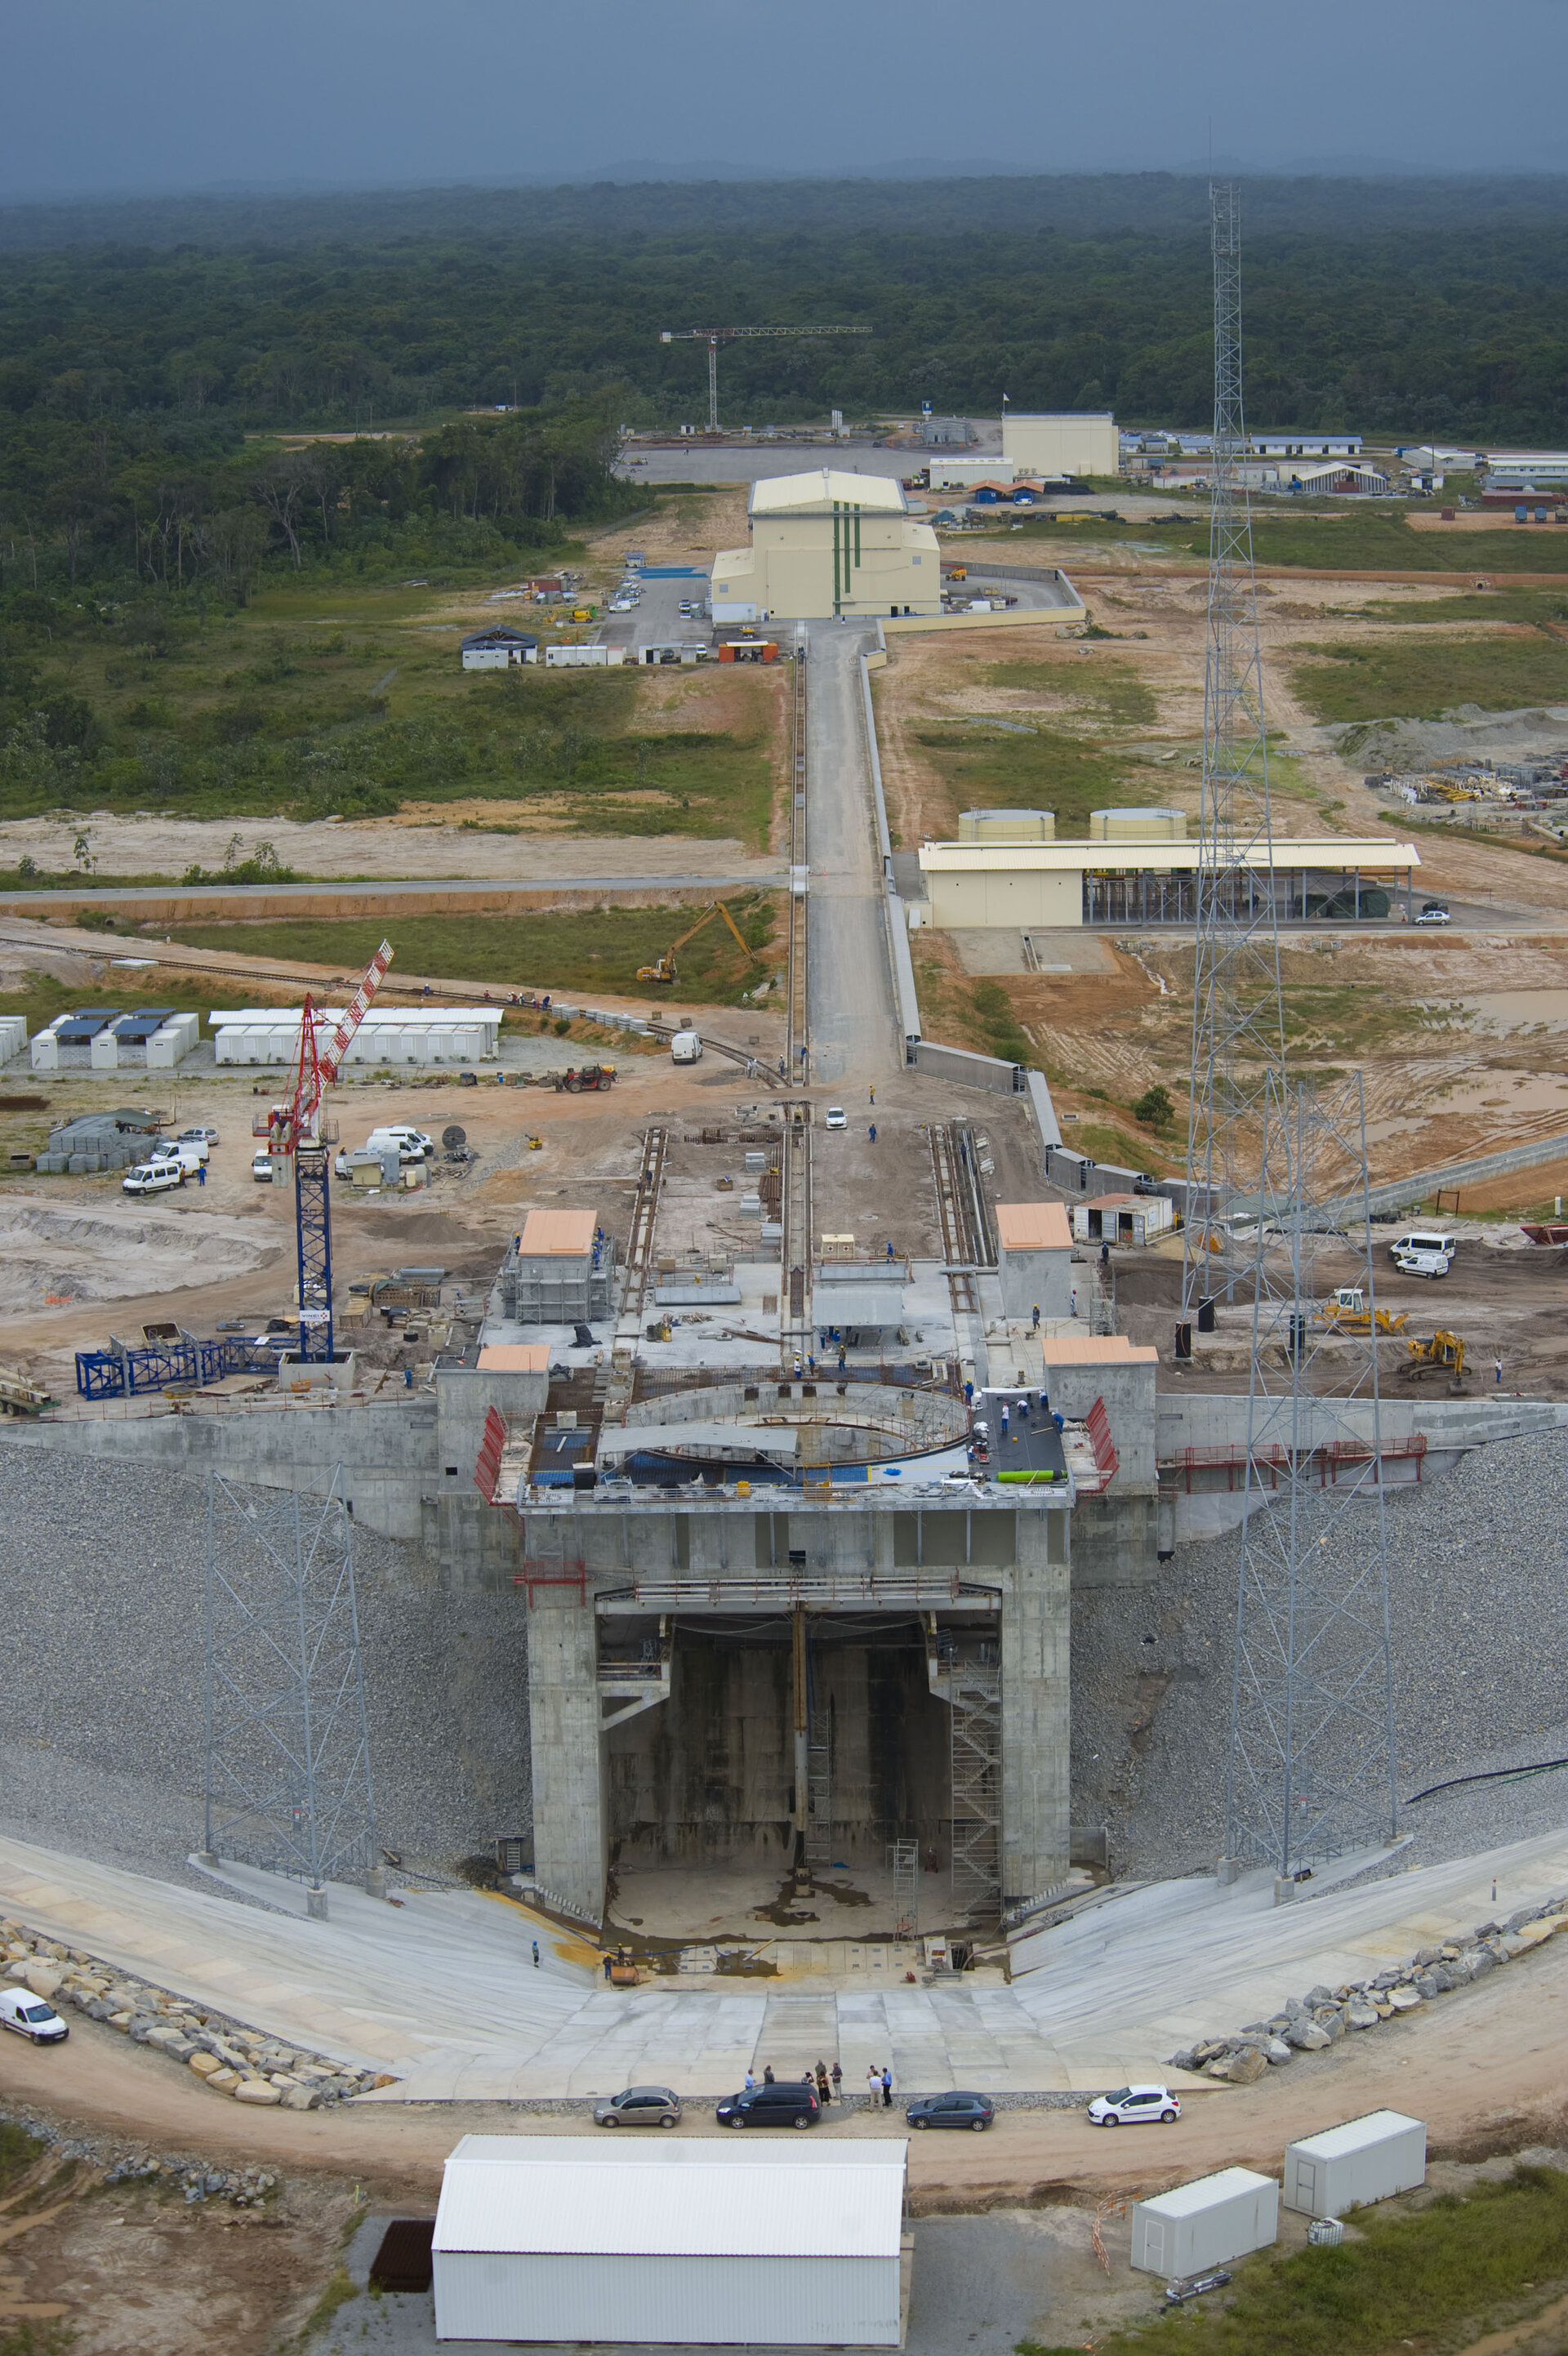 The new 'Soyuz at CSG' launch pad at the Guiana Space Centre,  French Guiana